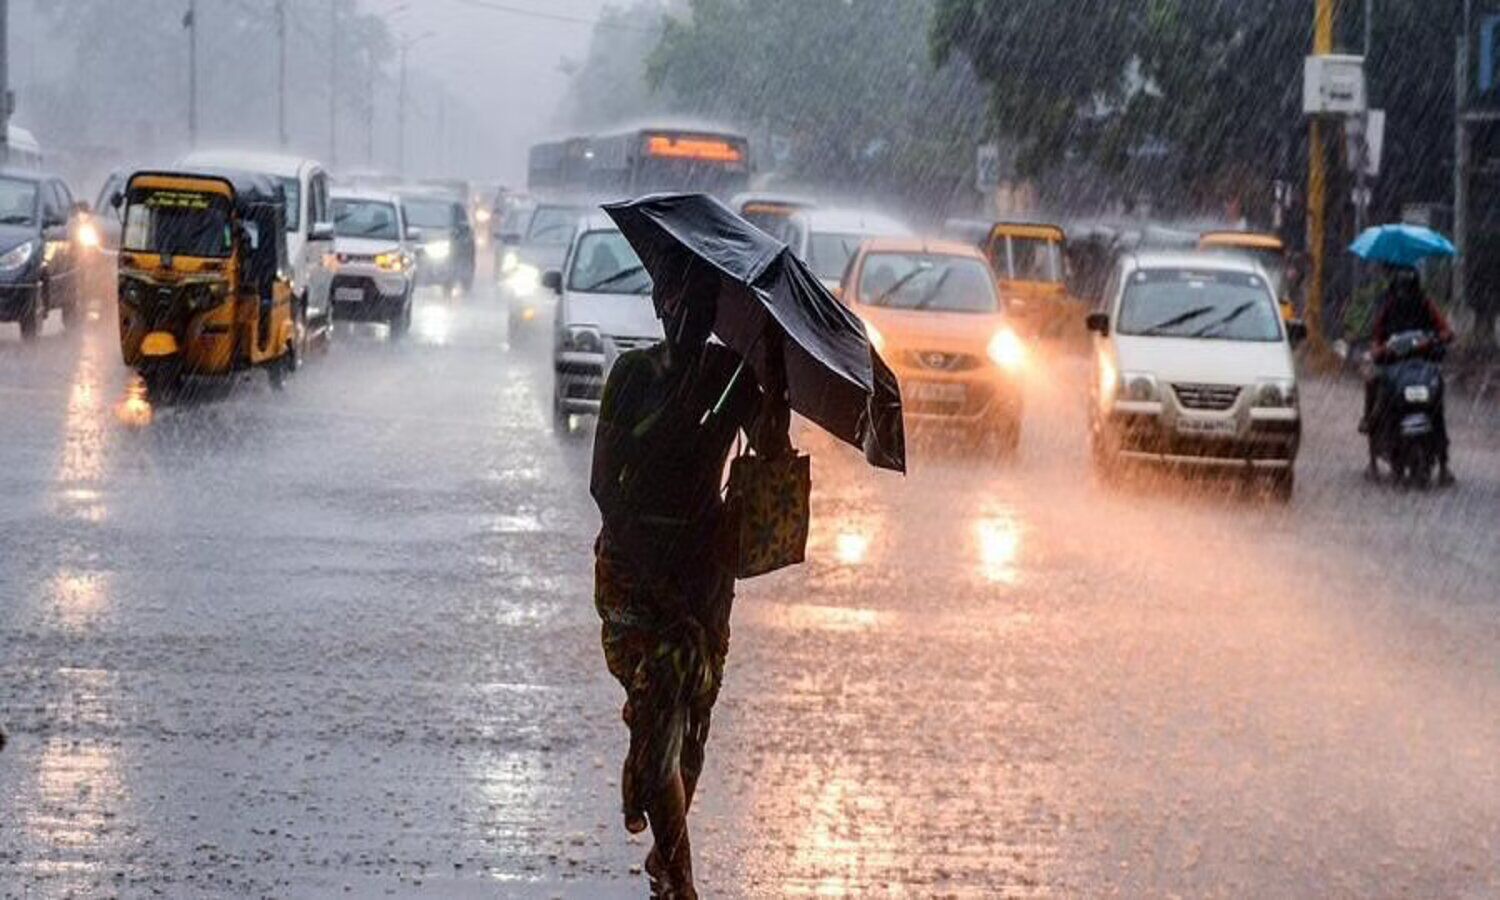 Weather Today Update: There will be heavy rain in many states including UP today, know the weather of your area